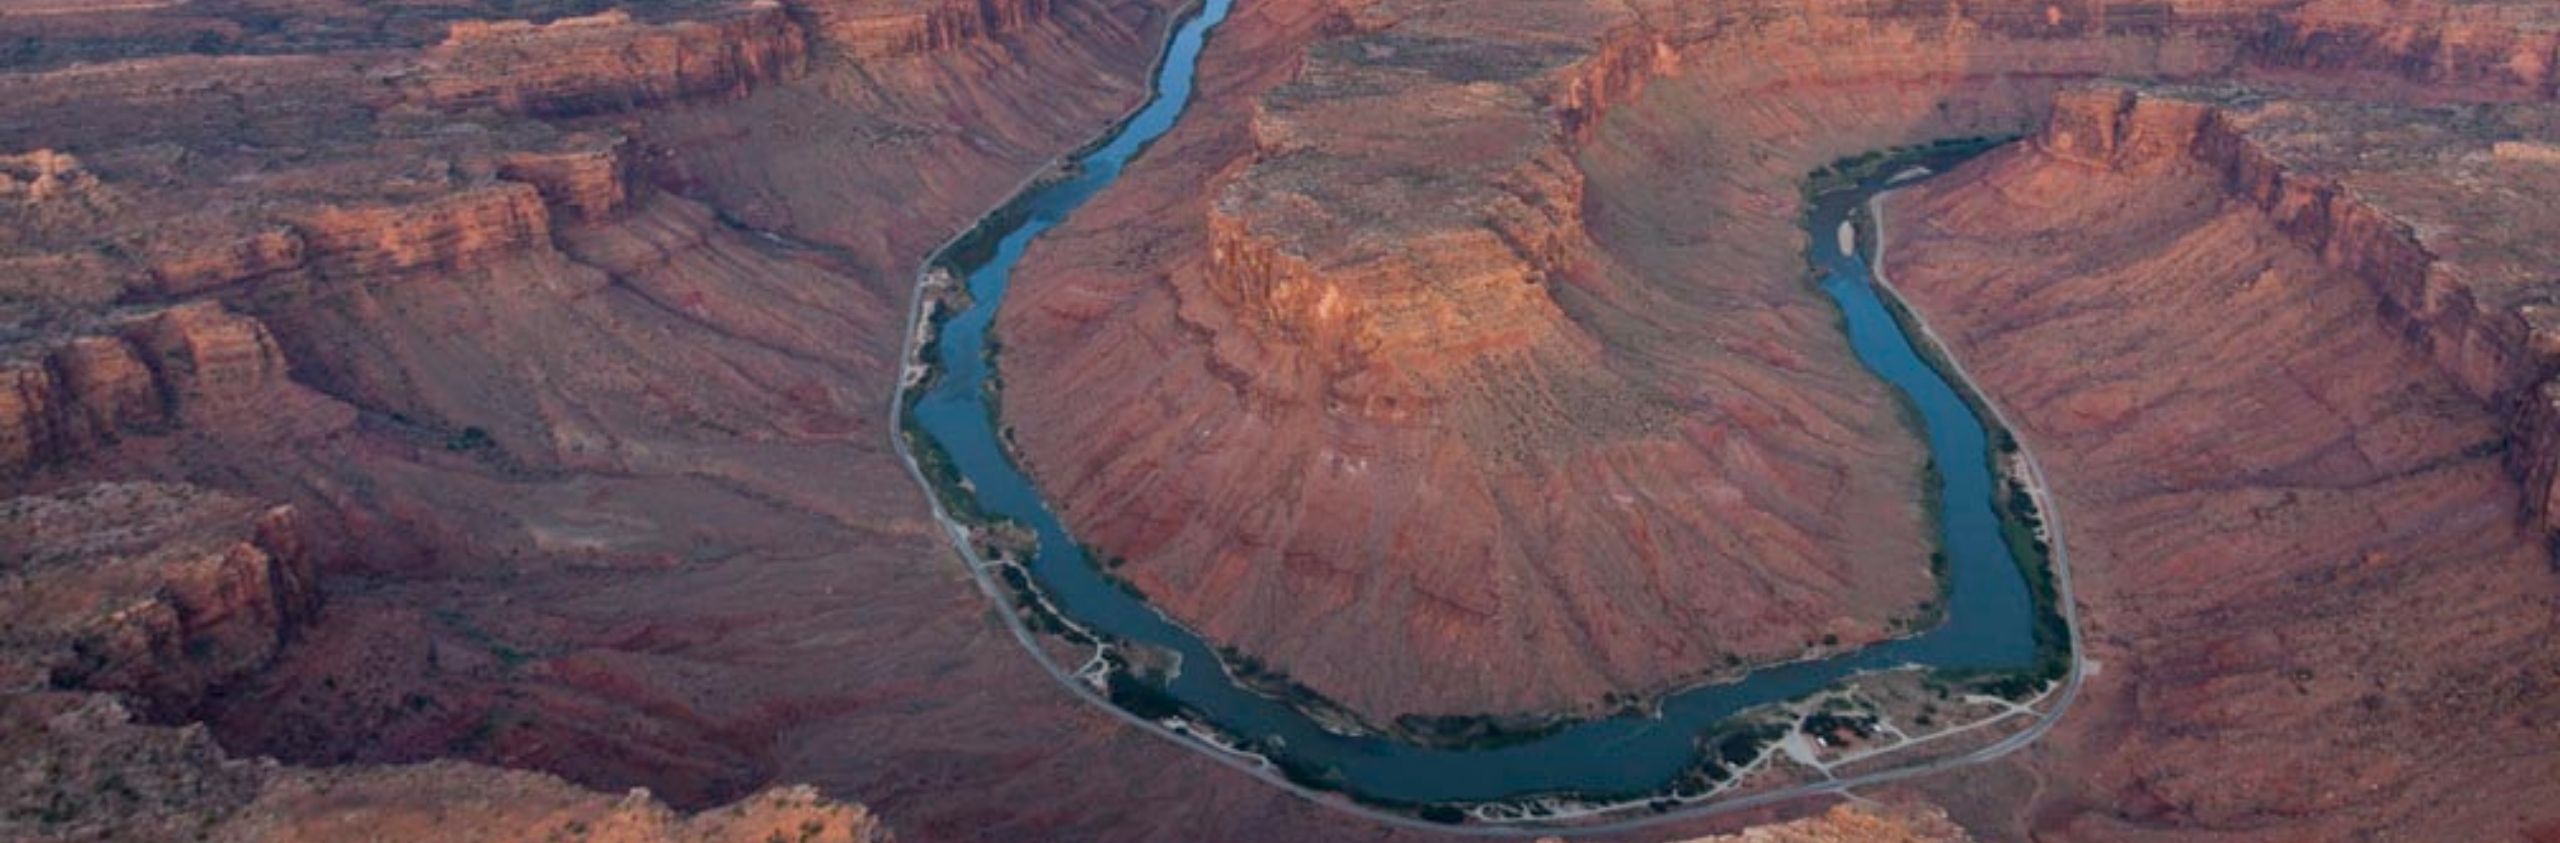 aerial view of river flowing through canyonlands